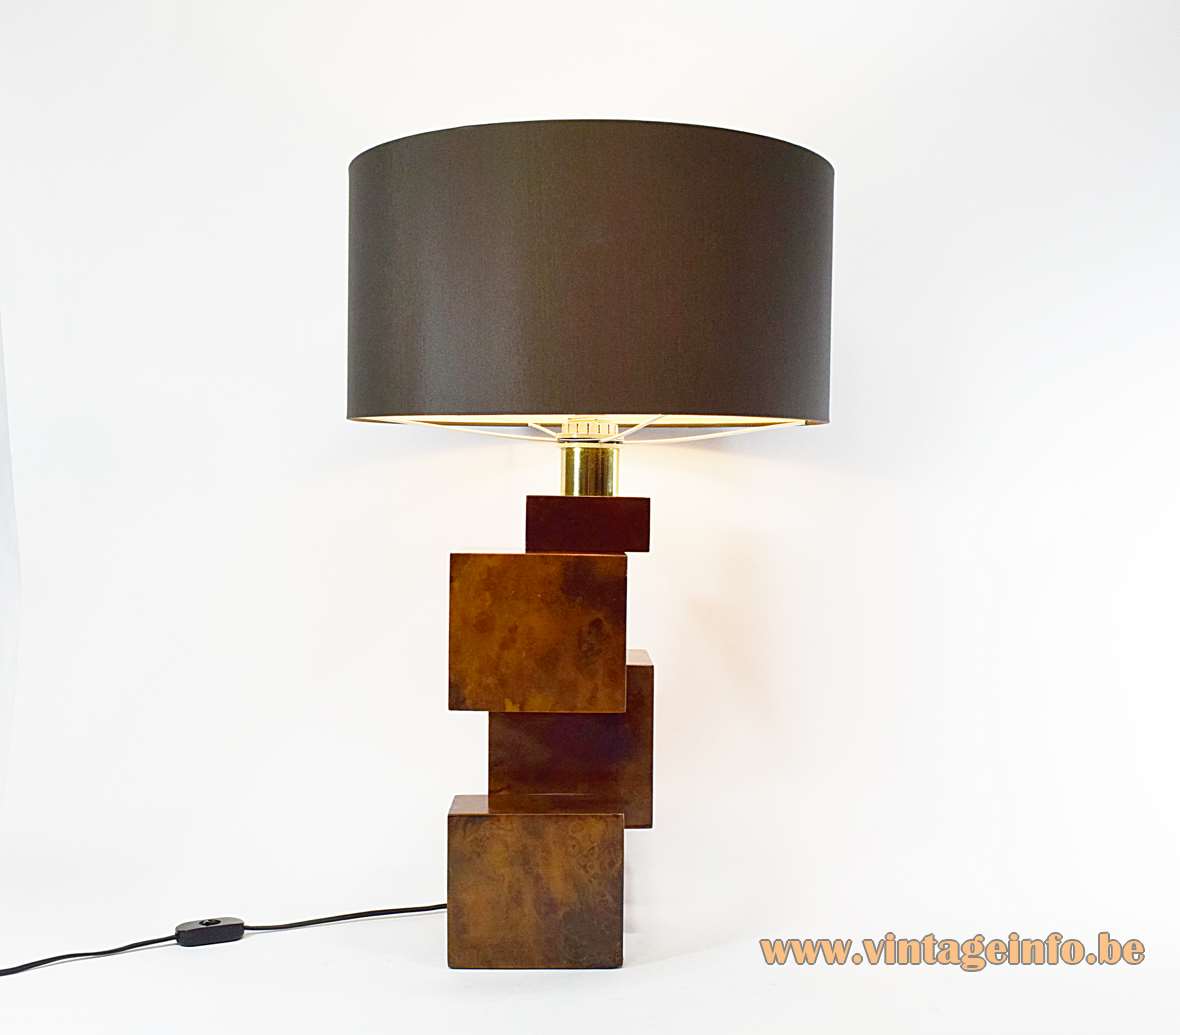 Burr walnut cityscape table lamp geometric wood cubes base round brown tubular lampshade 1960s 1970s Italy